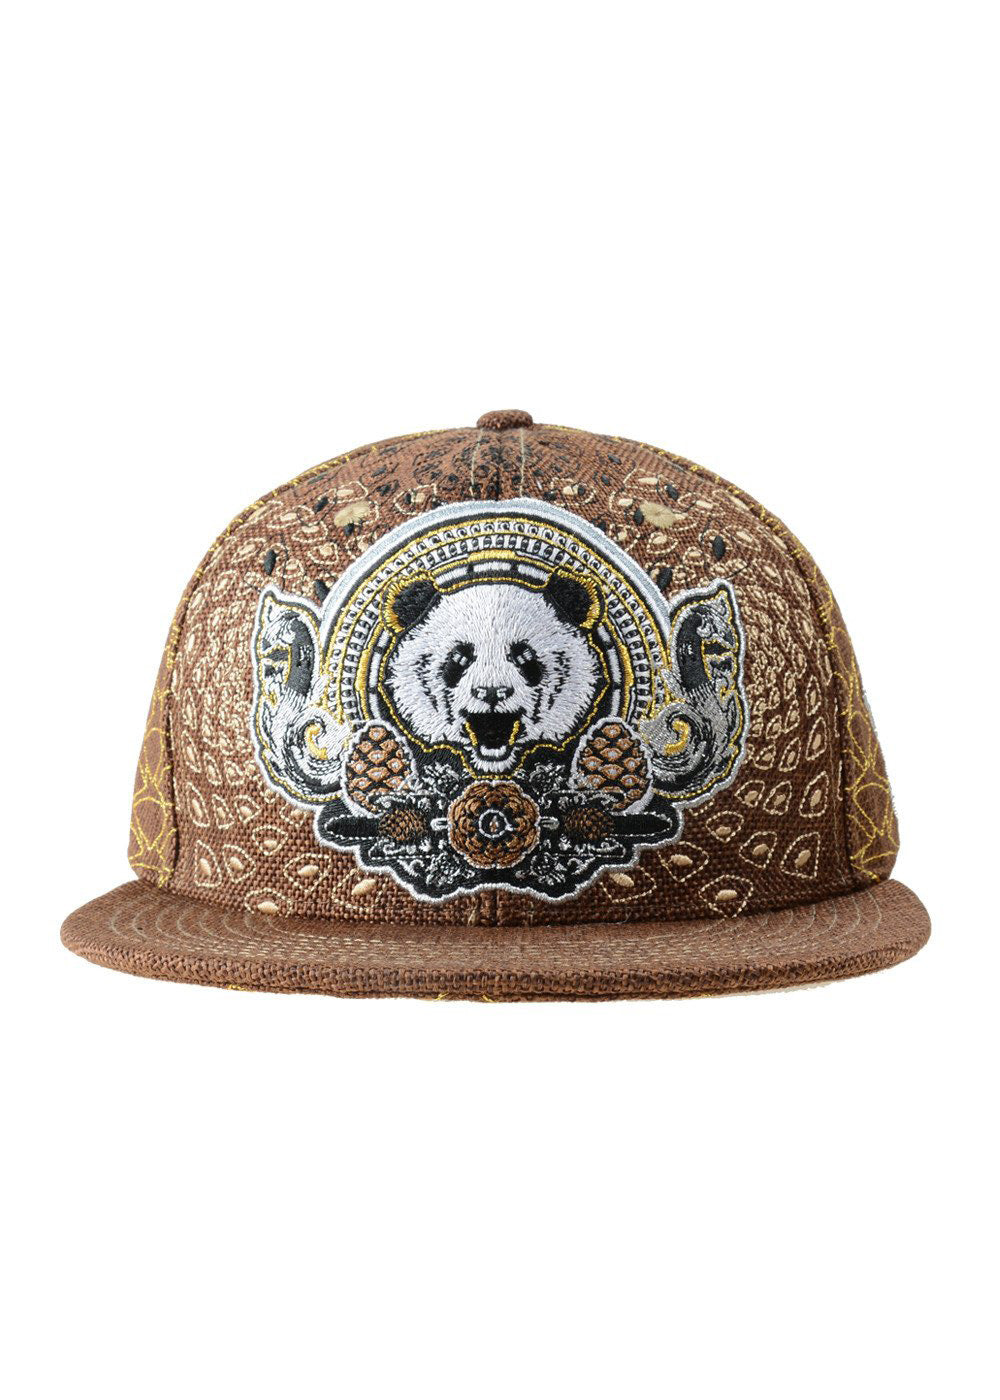 Grassroots Third Eye Pinecone Panda Fitted Hat